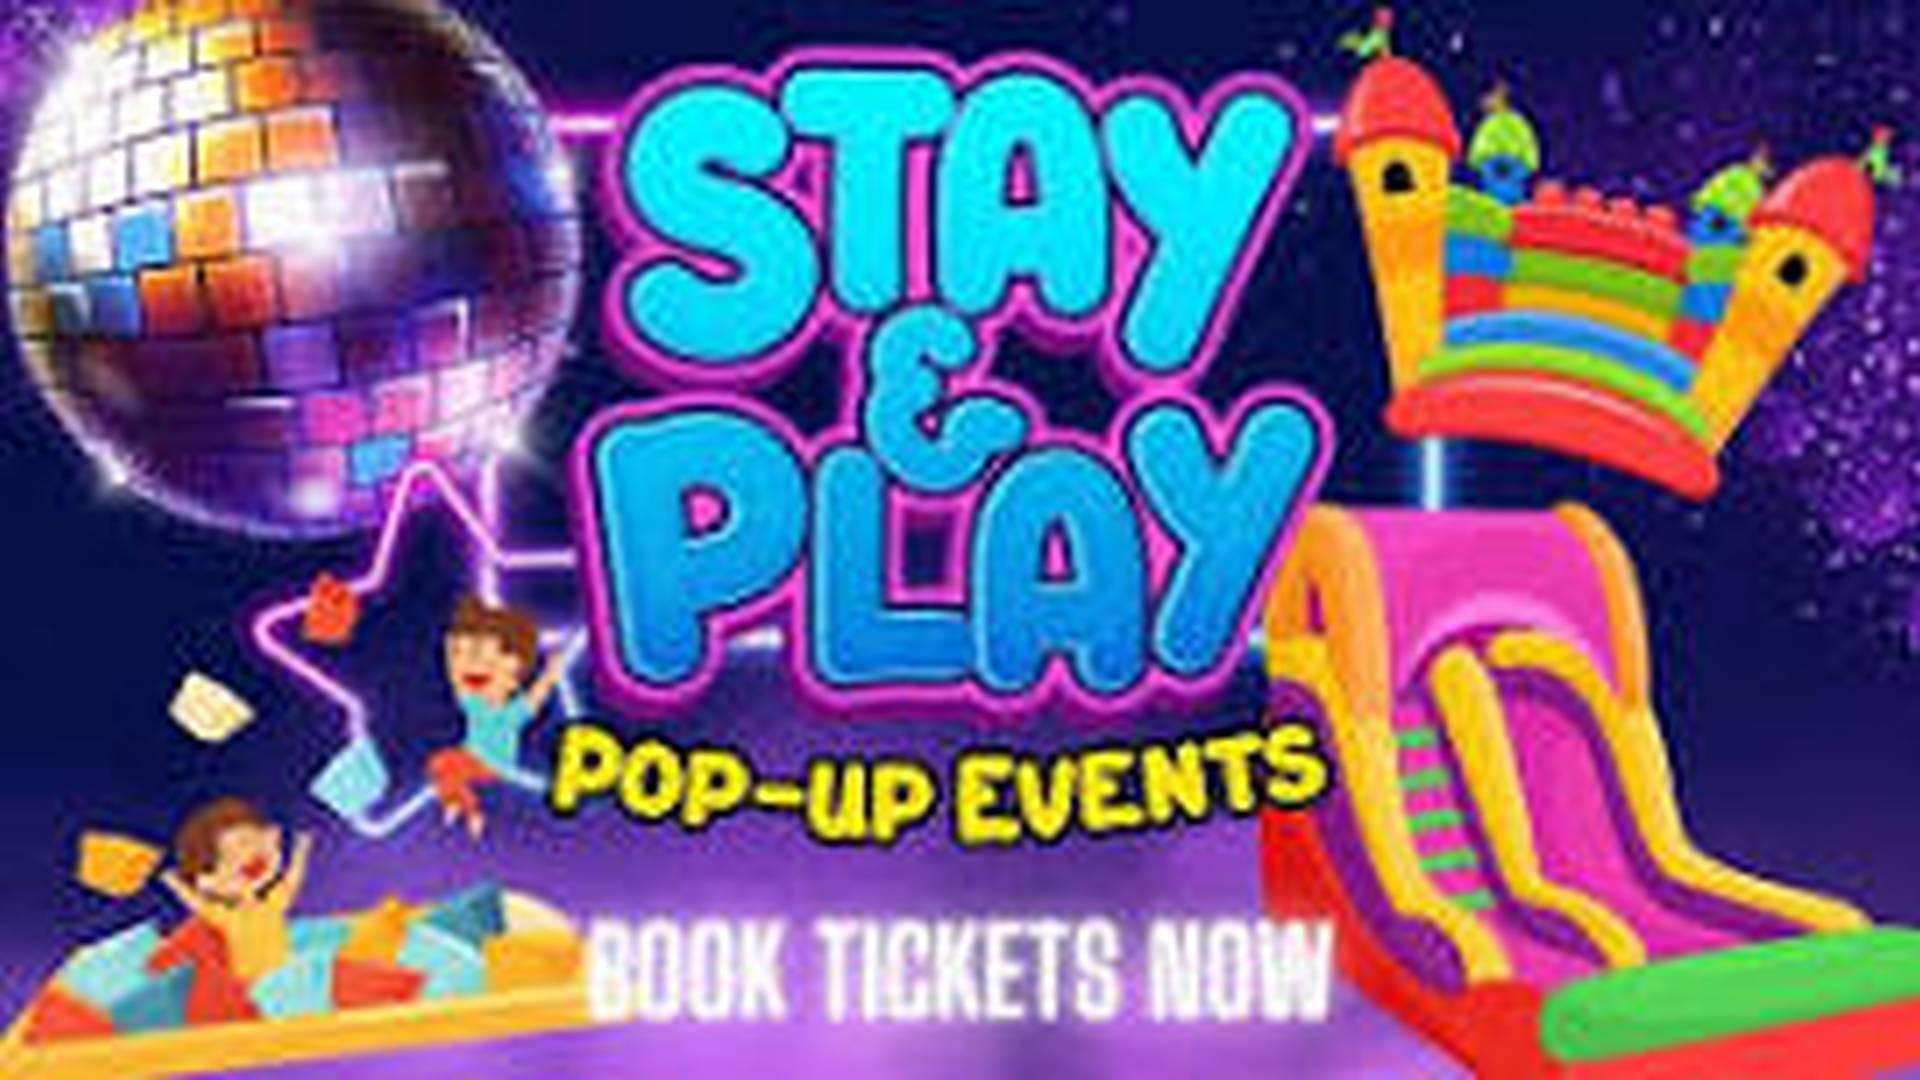 Stay & Play Pop-up Events - Indoor Inflatable Activity Zone photo